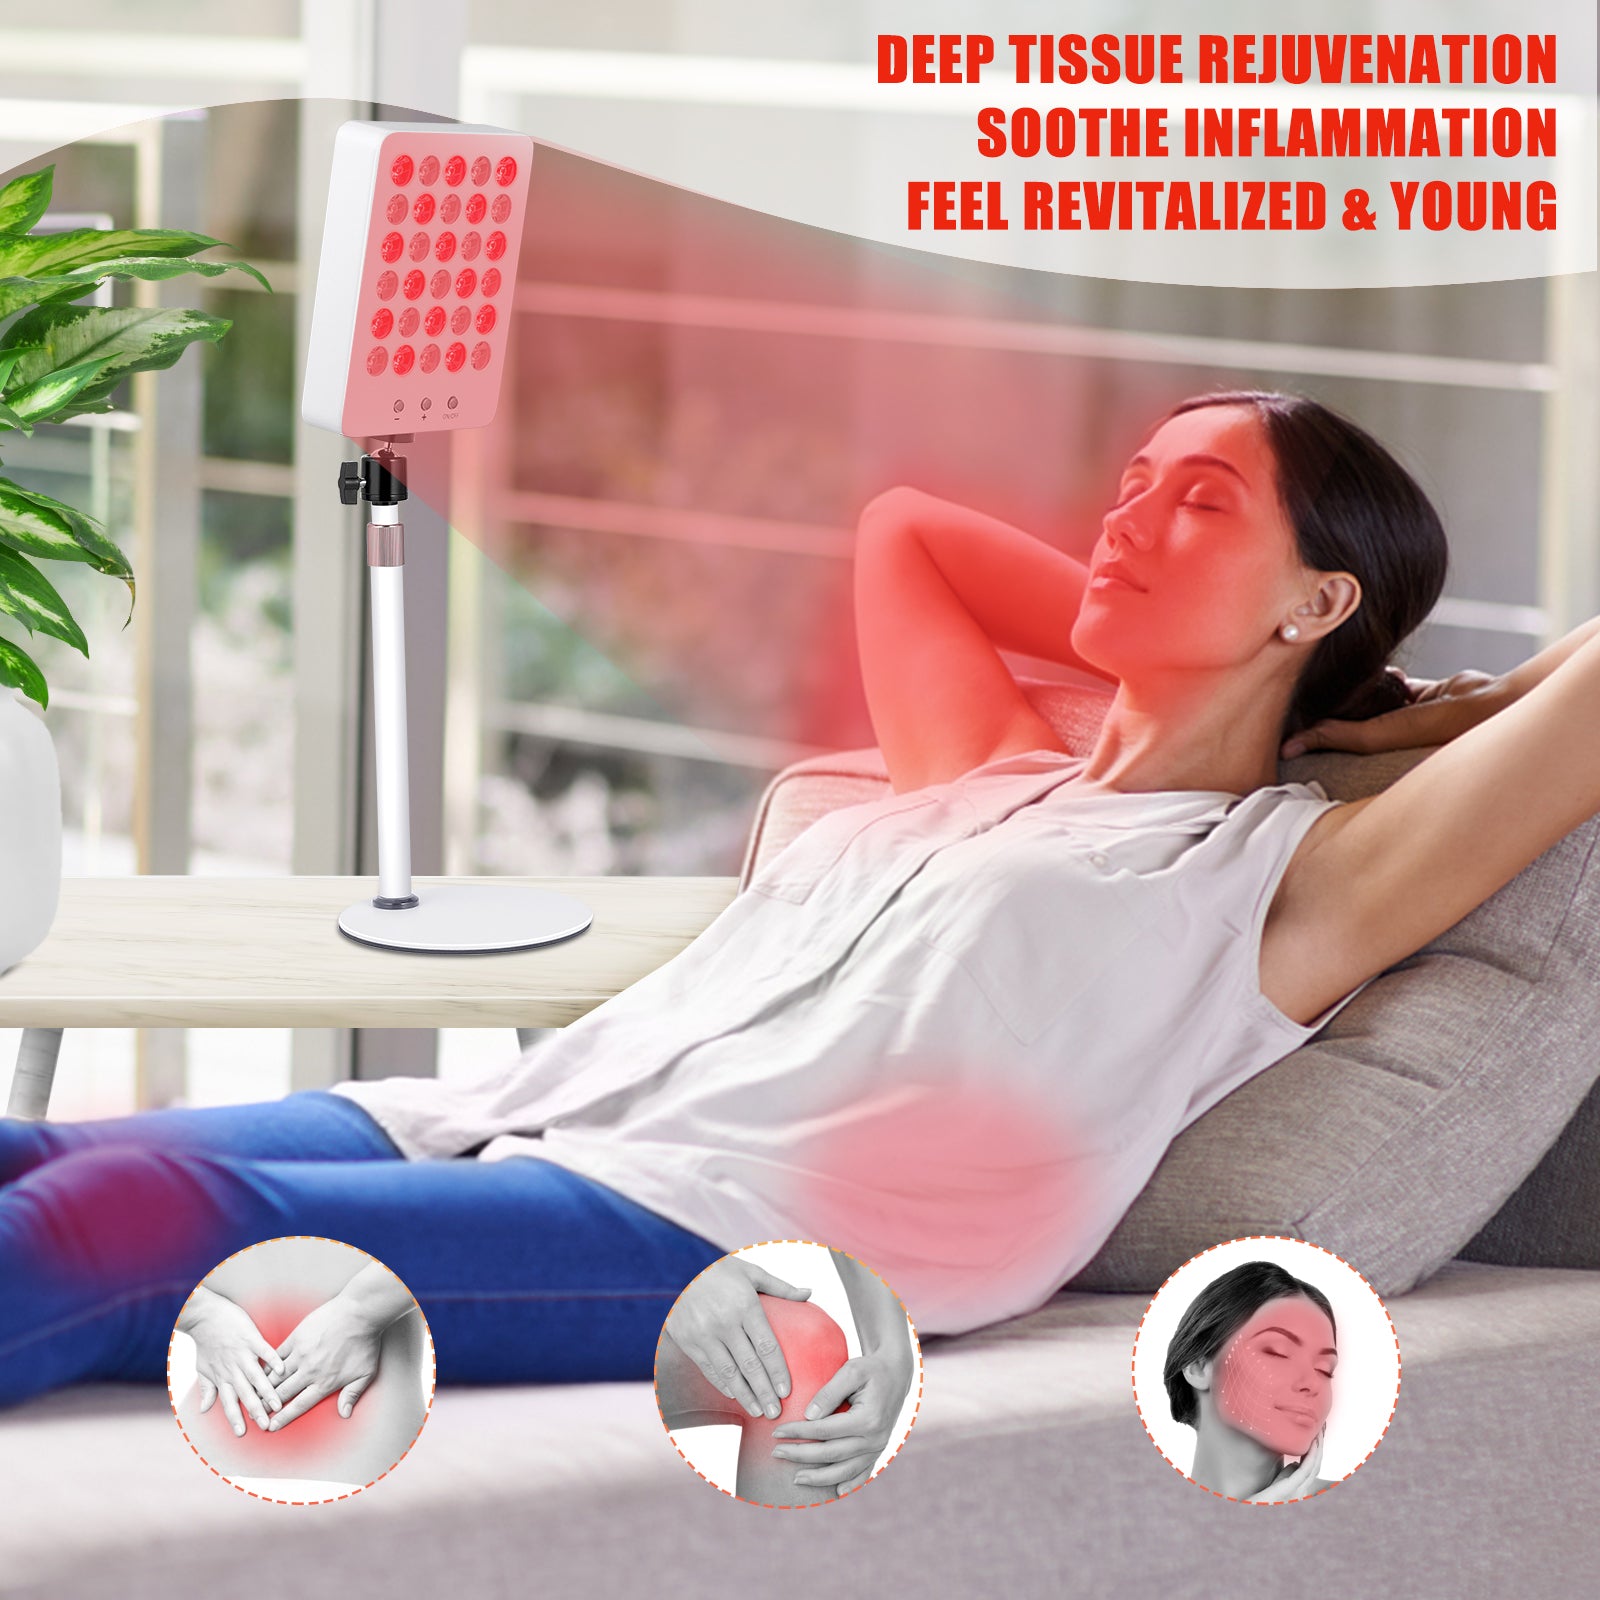 Red Light Therapy Device Panle,660nm 850nm